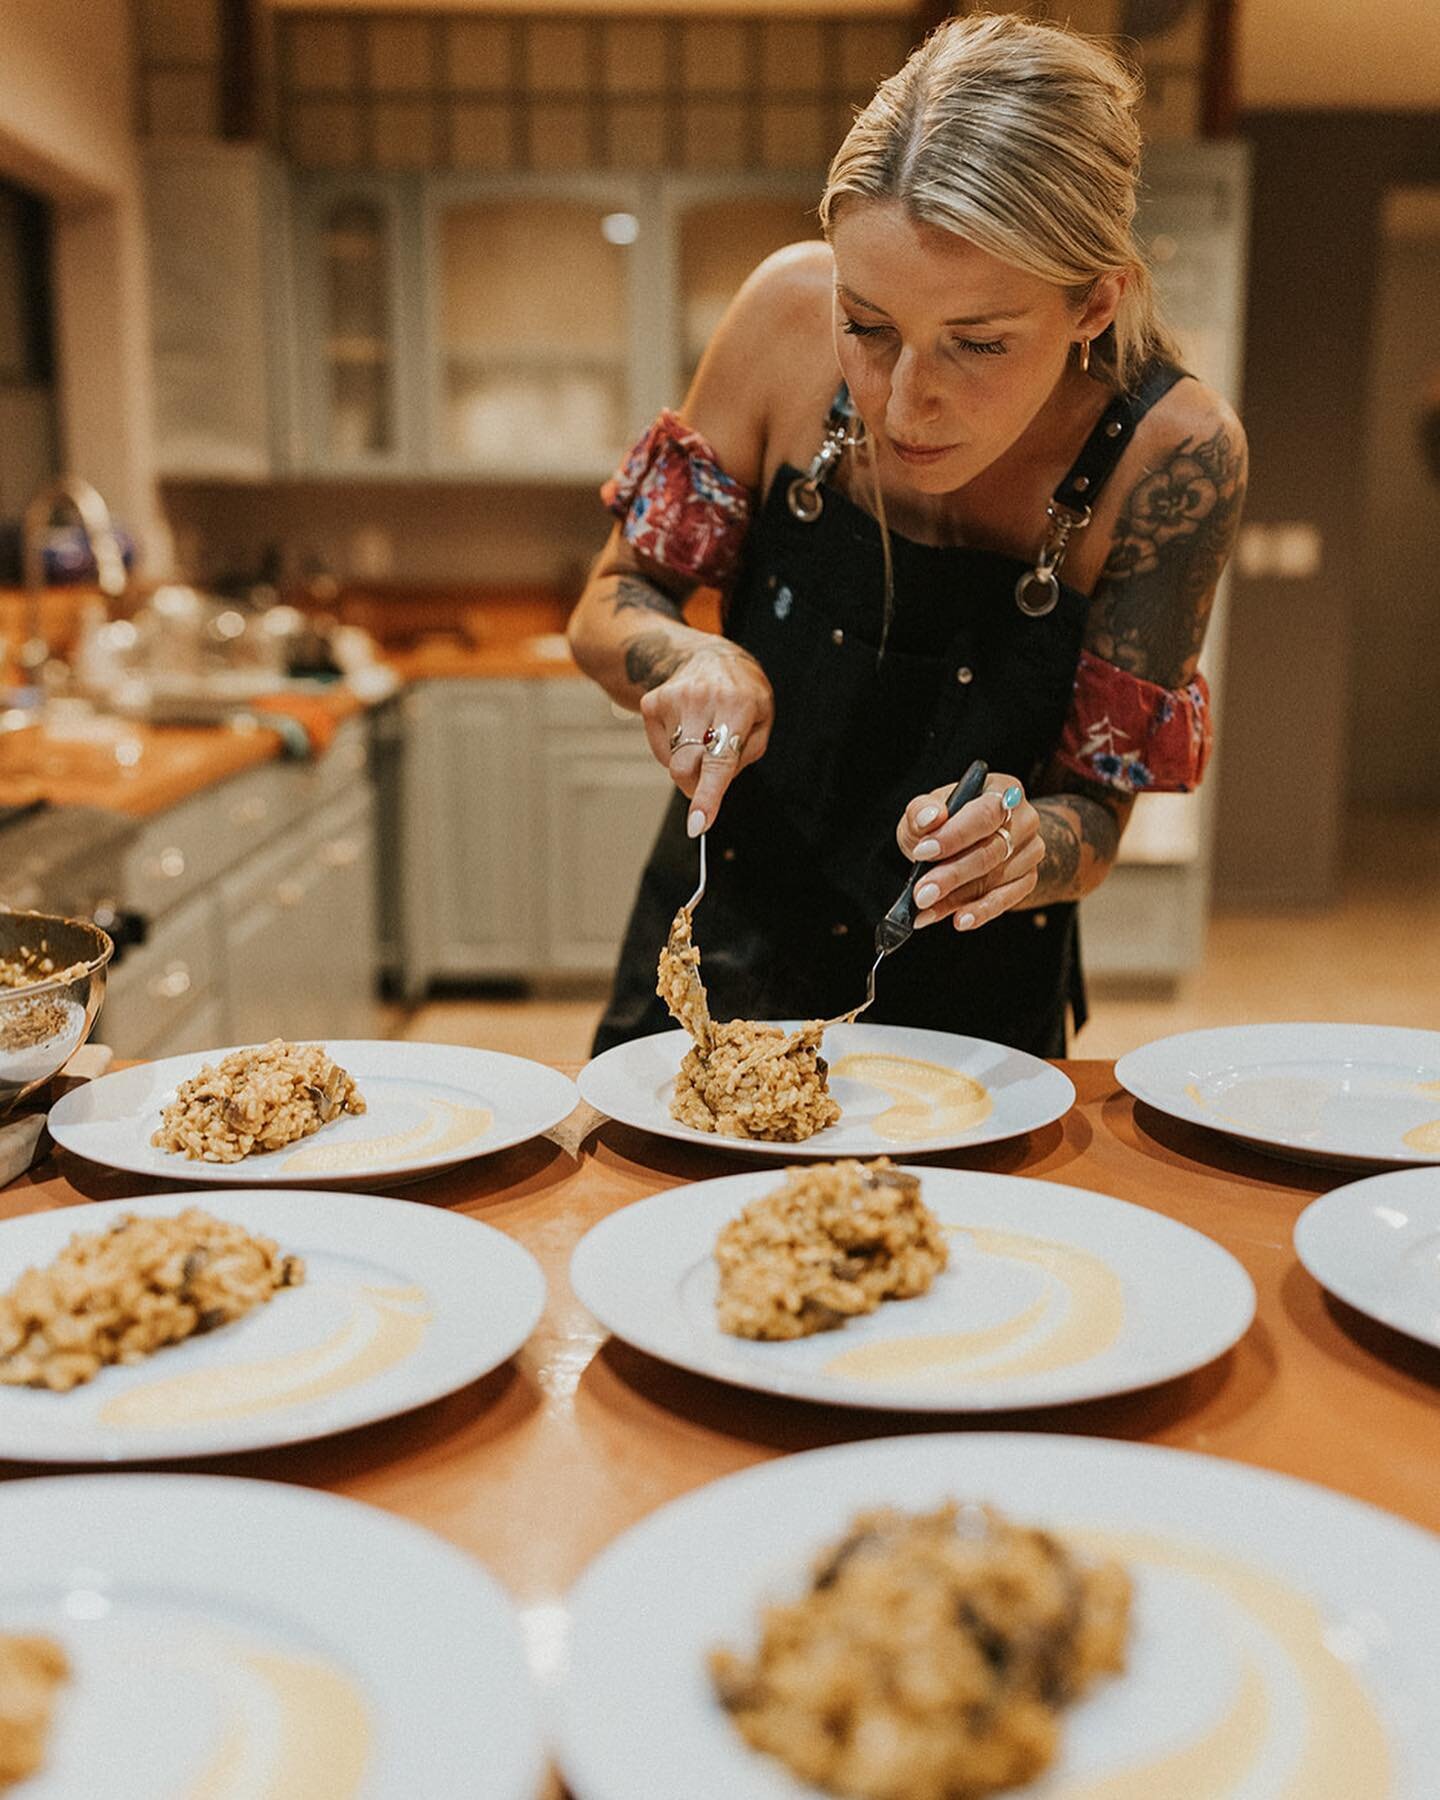 i cook in hopes of generating inspiration for others to nourish themselves in their own kitchen⠀⠀⠀ ⠀
⠀⠀⠀ ⠀
perfection never exists in the kitchen: it's a blend of trying + trying again. some things work. some well. some things don't. inedible. each t